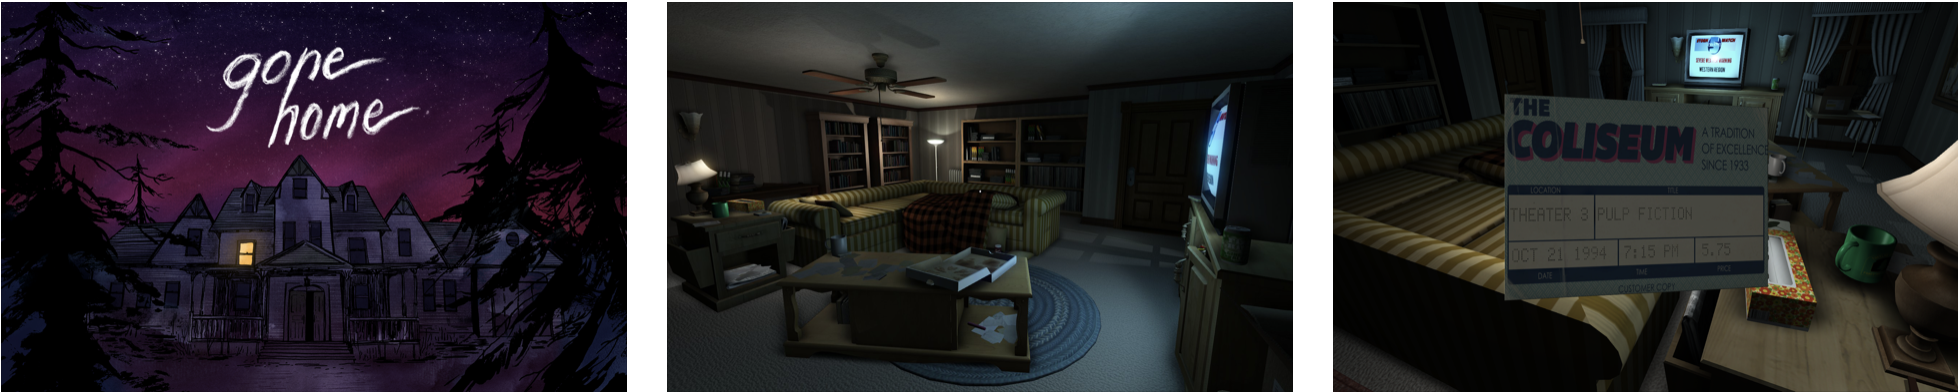 App Store Specials of the Day: Gone Home, SNIKS, PDF Compress Expert, and more!